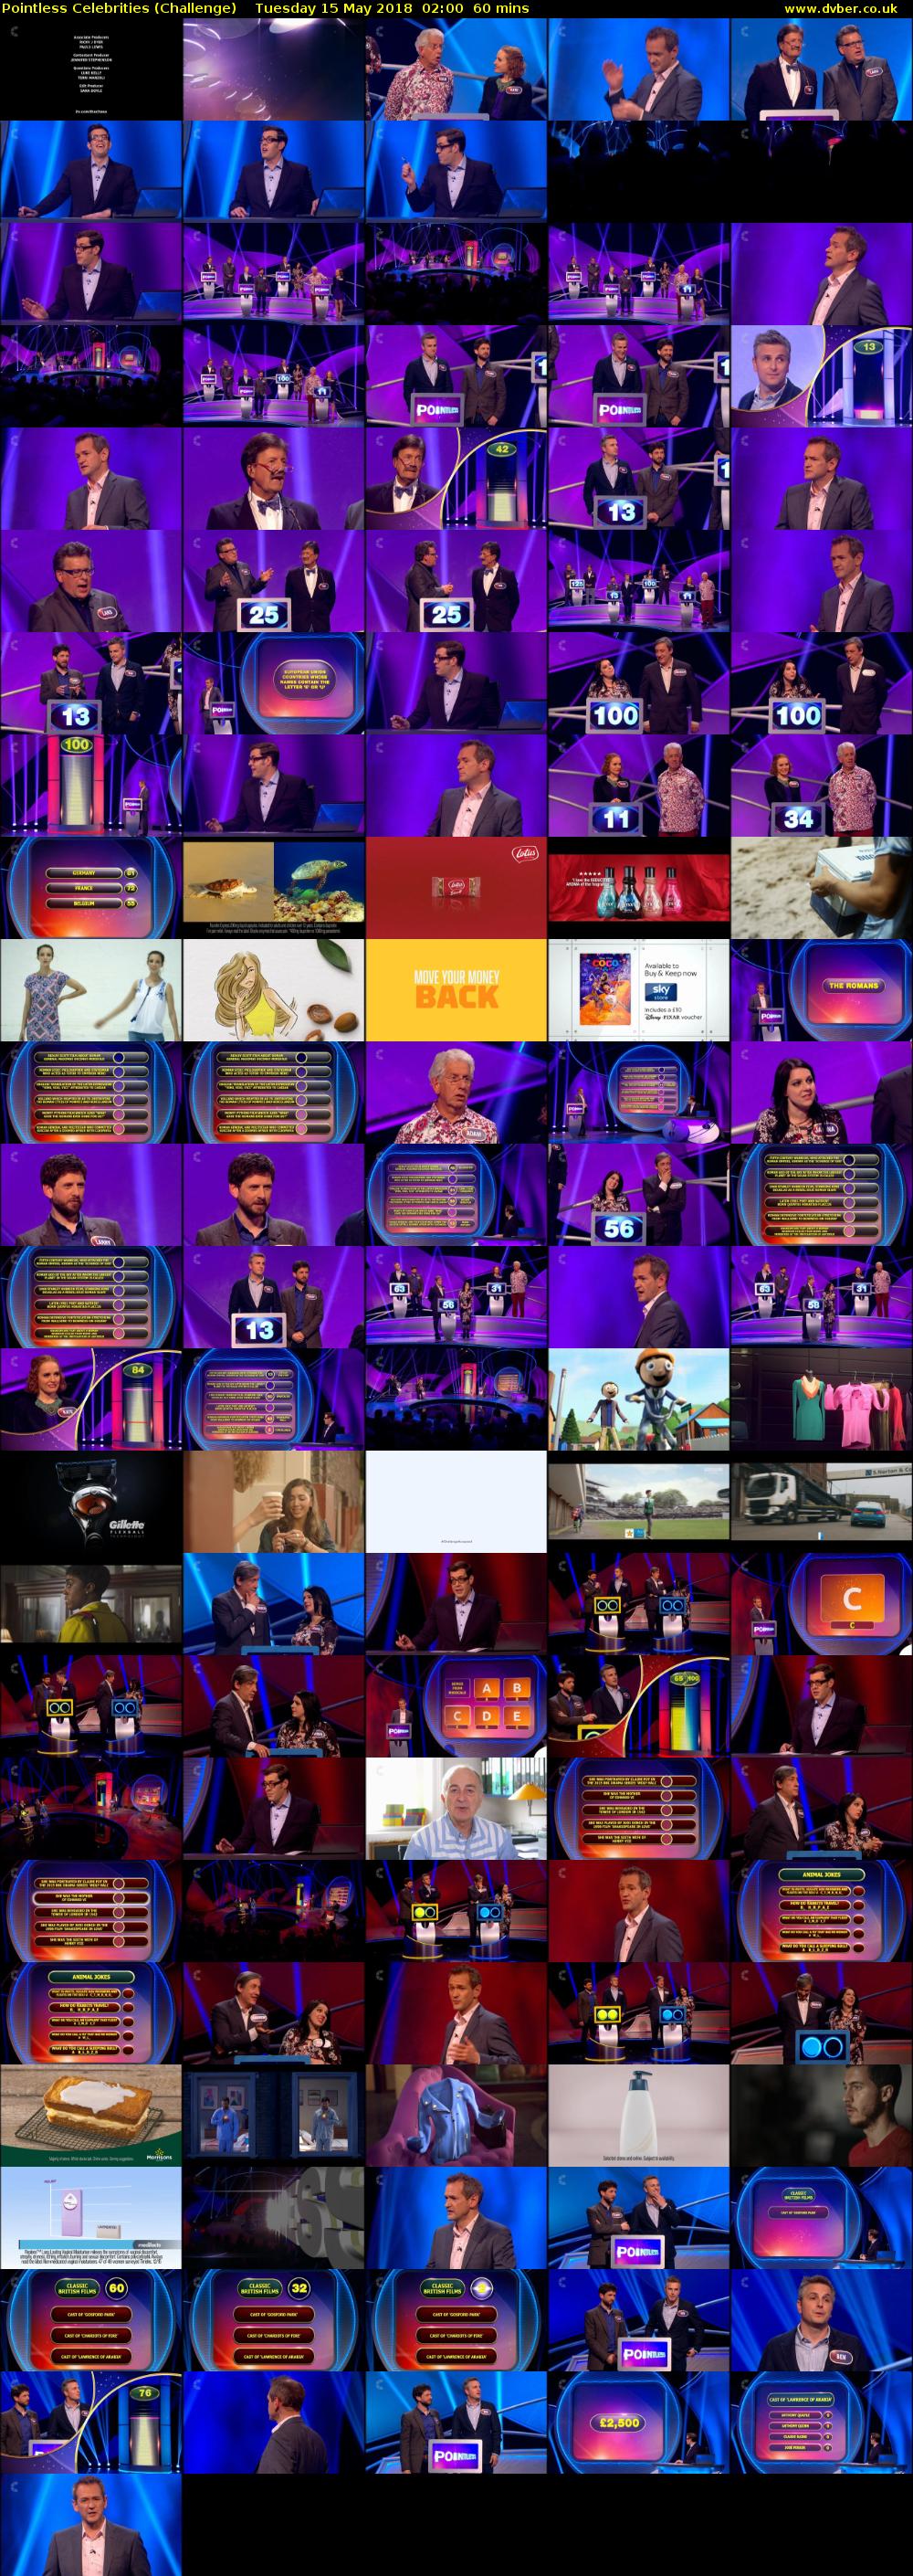 Pointless Celebrities (Challenge) Tuesday 15 May 2018 02:00 - 03:00